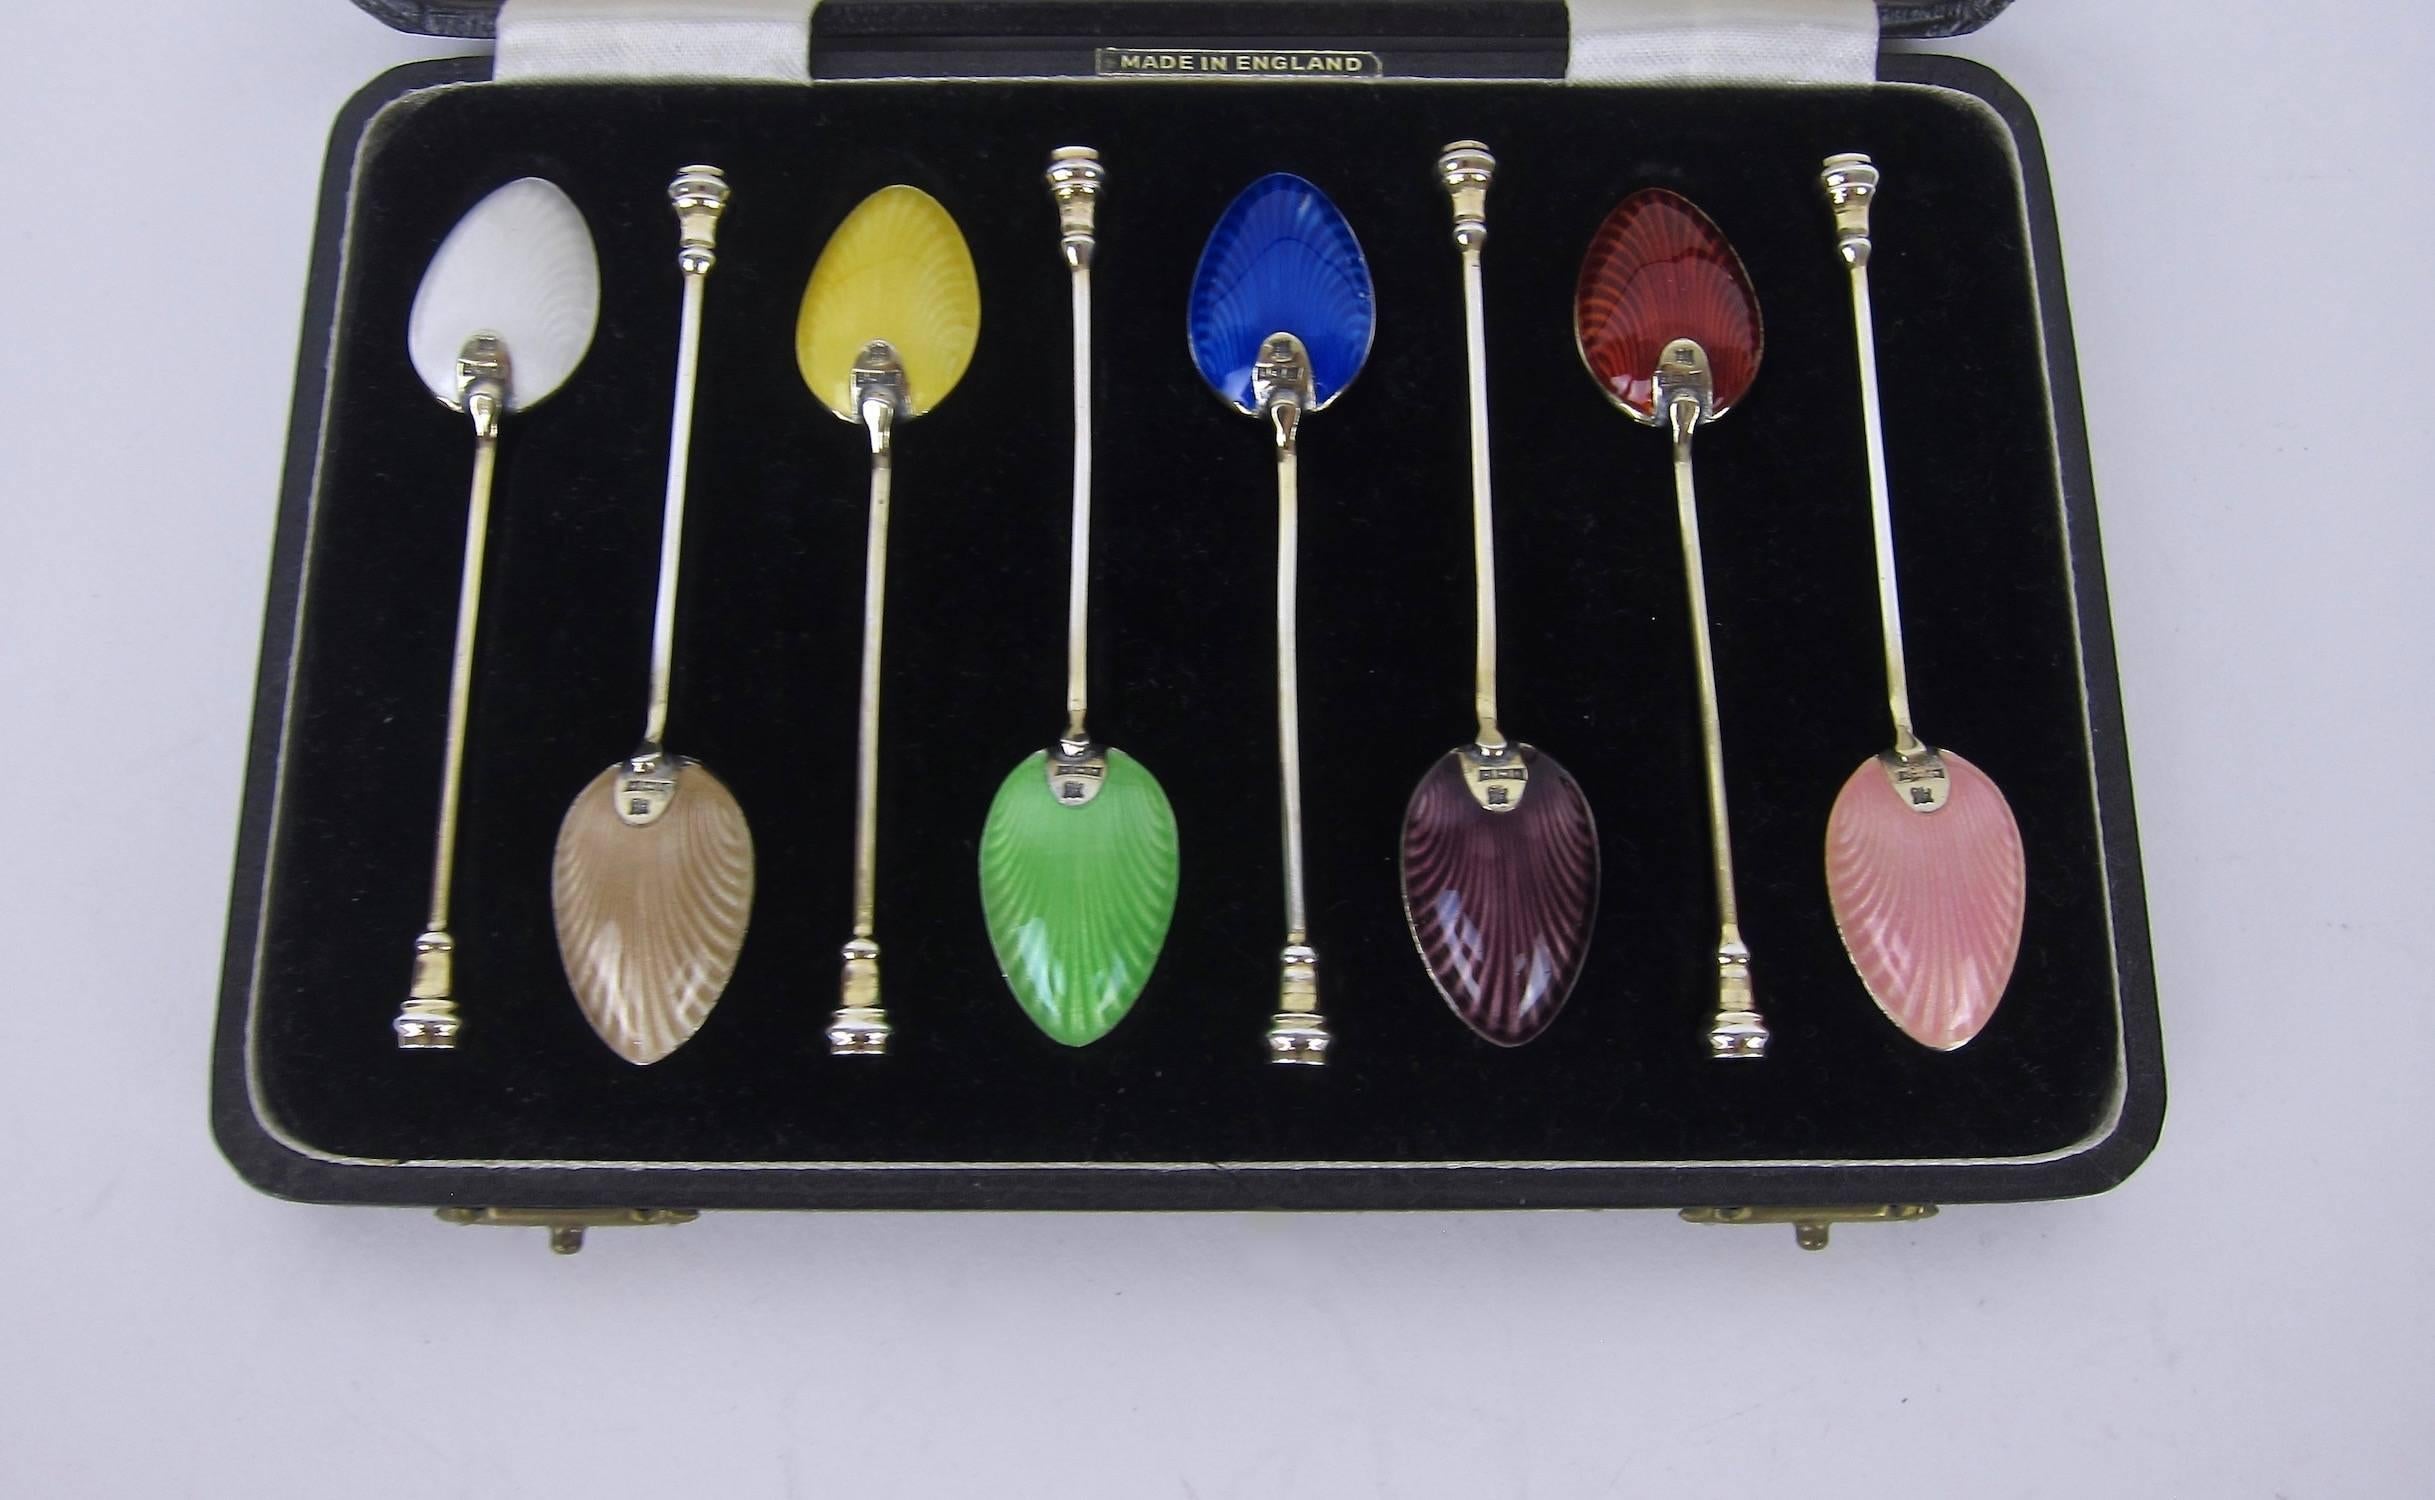 A vintage boxed set of eight enameled sterling silver demitasse spoons from the Birmingham Guild of Handicraft. The reverse of each silver spoon bowl is embellished with jewel toned guilloche enamel in a shell pattern, bearing sterling silver